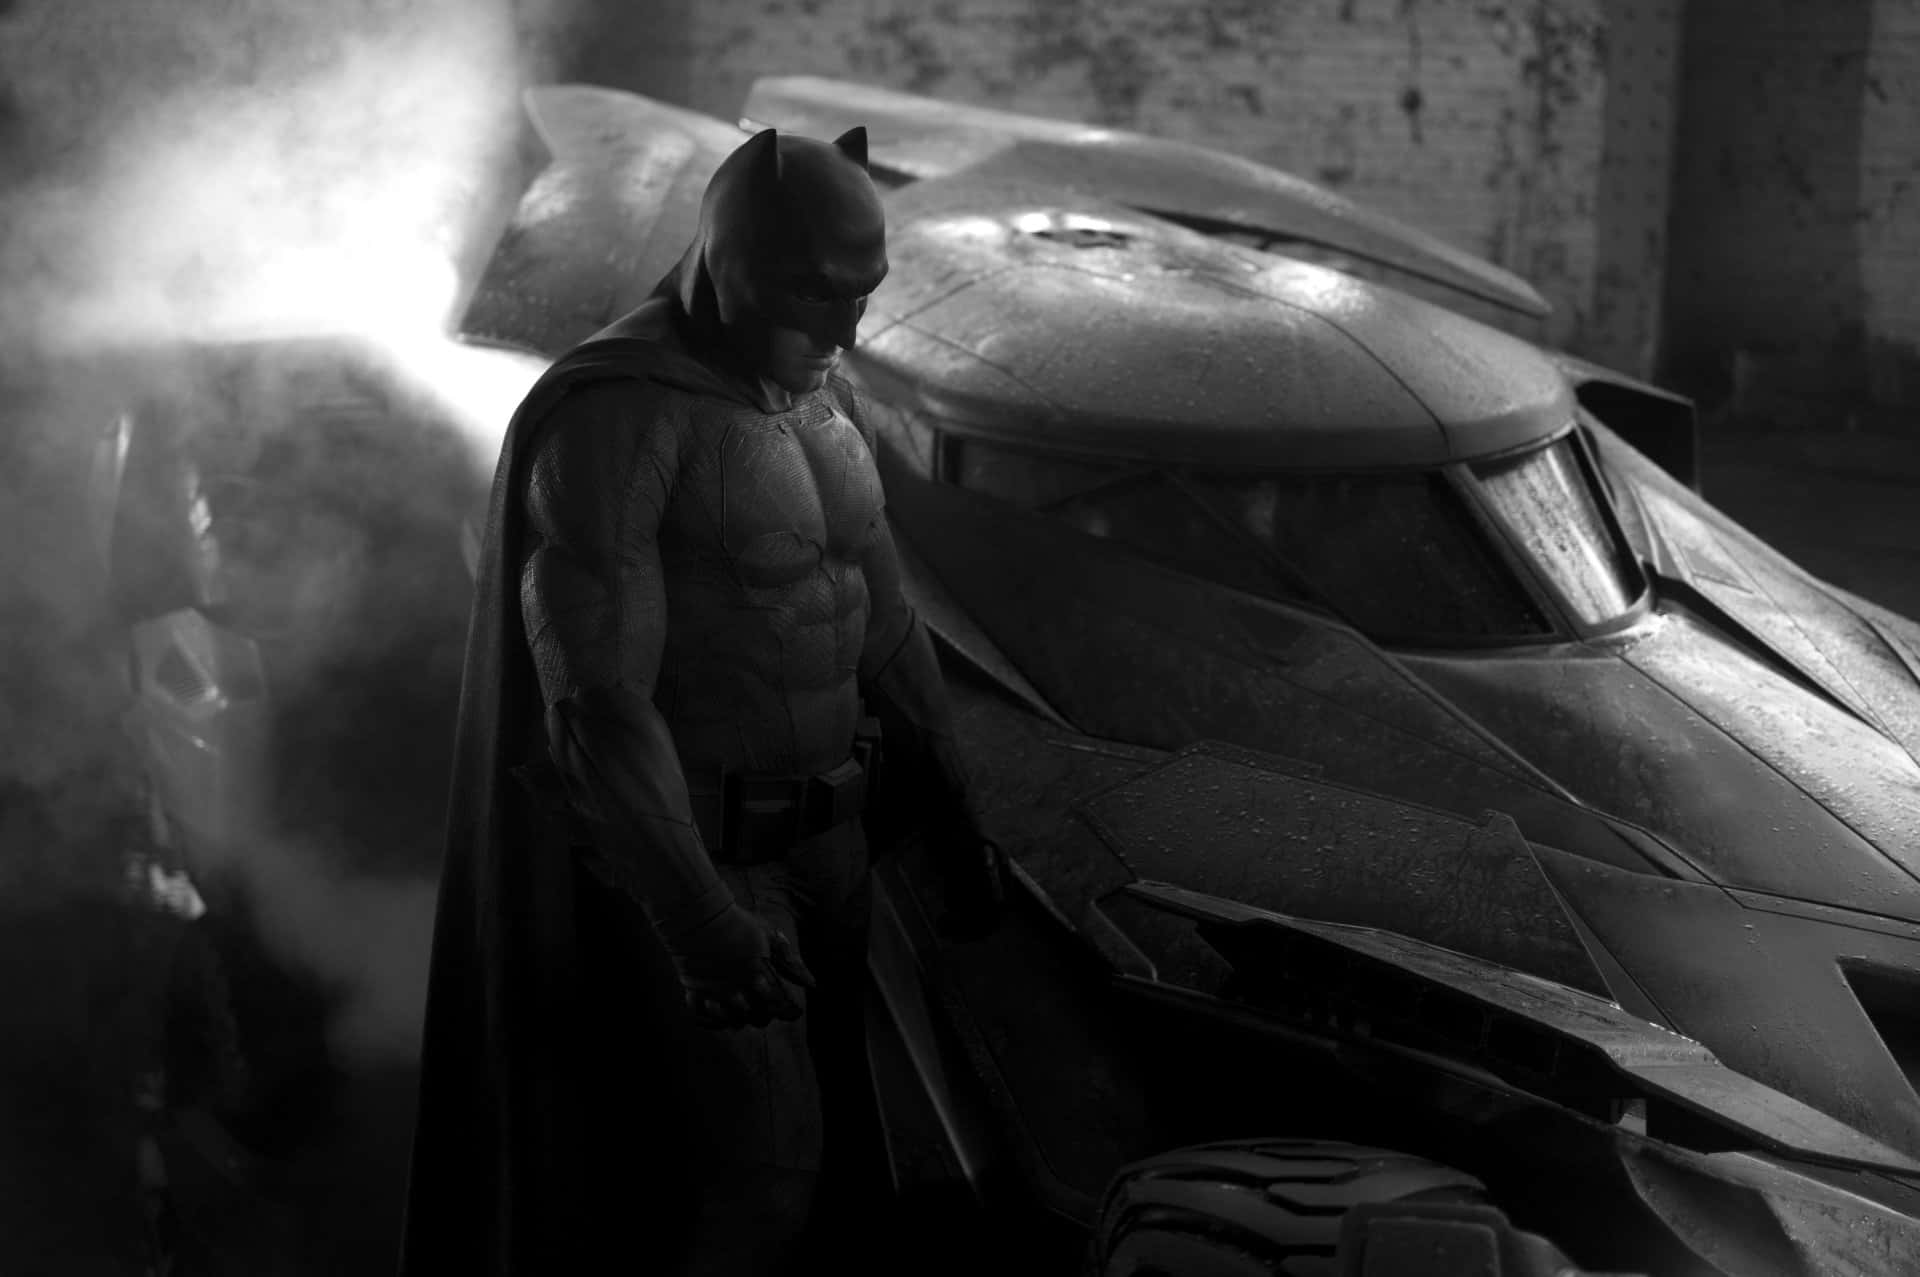 Out of the Batcave and ready for action! Wallpaper